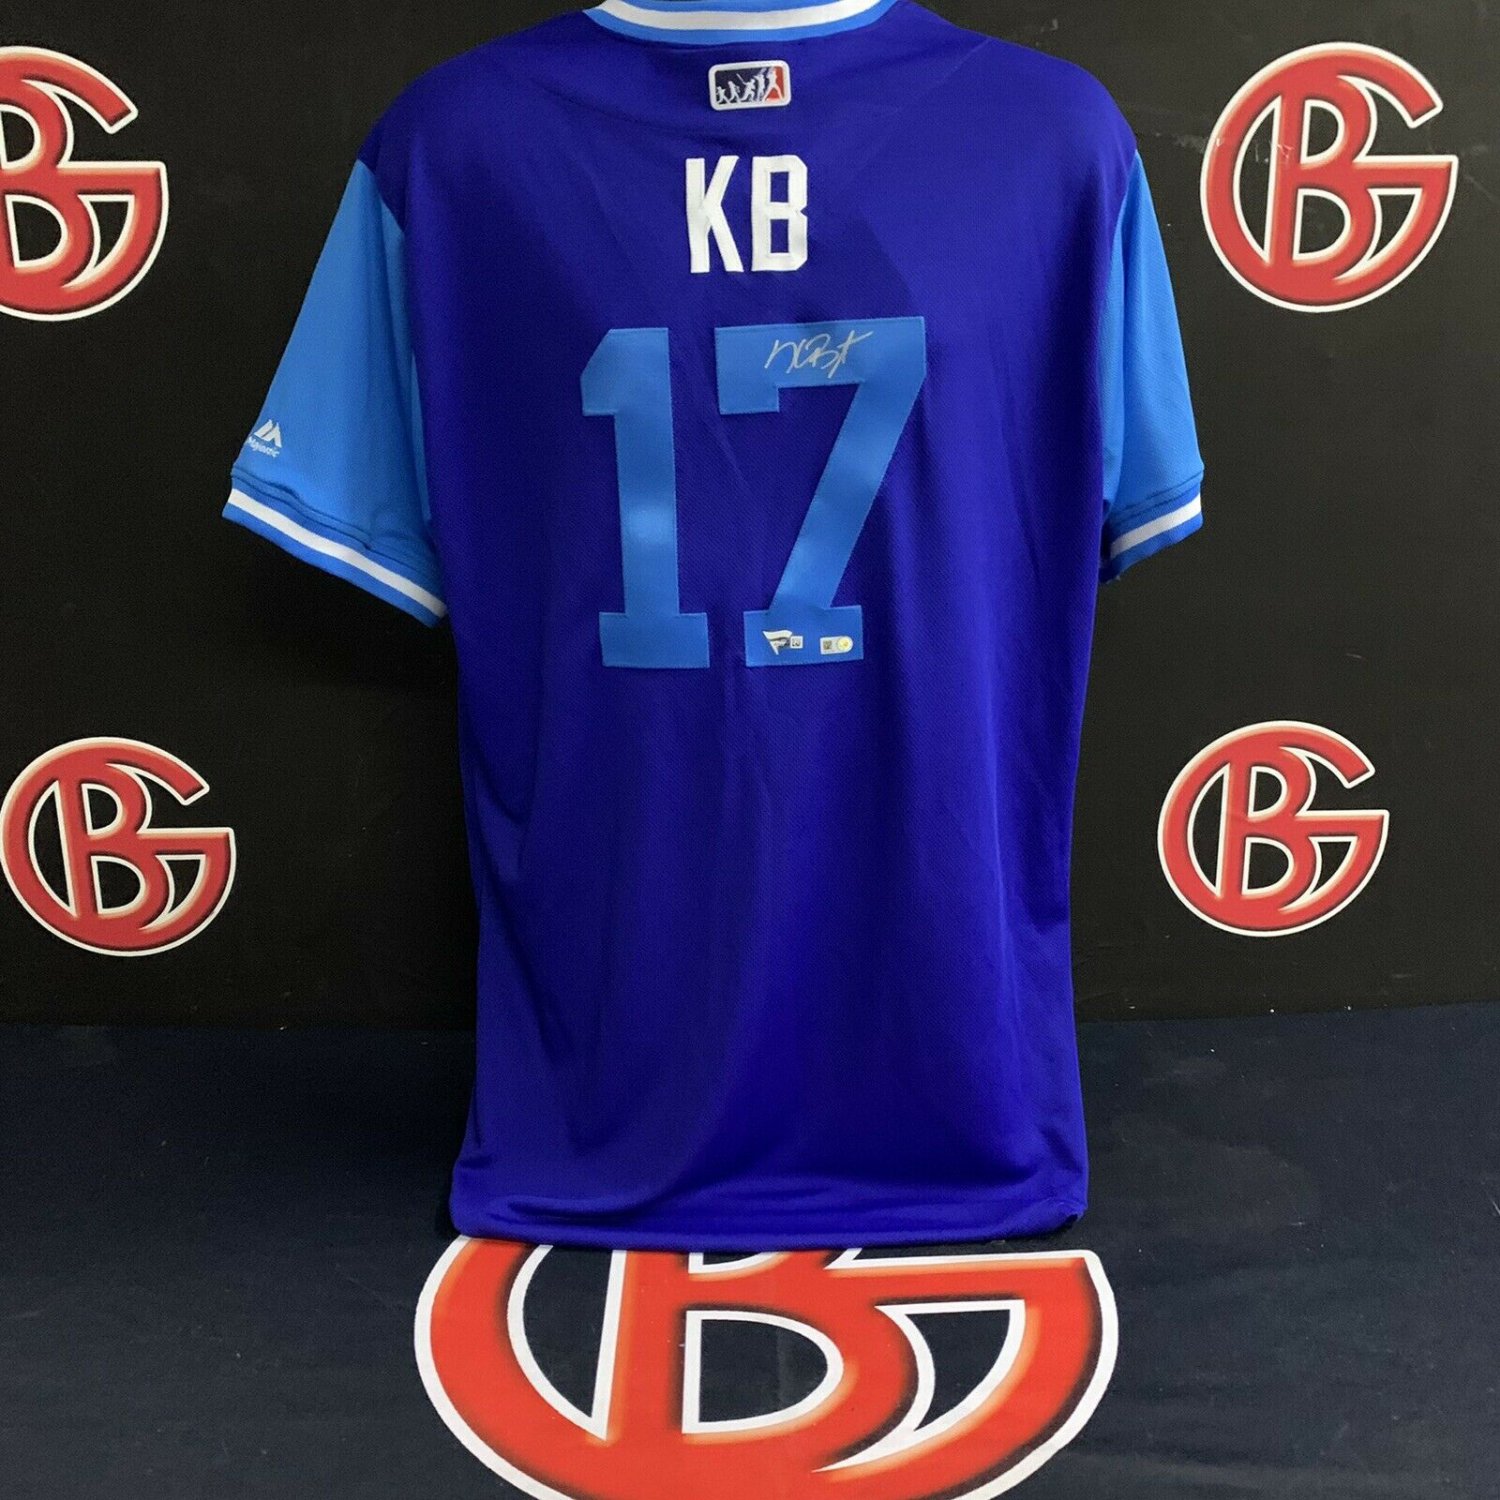 kris bryant signed jersey